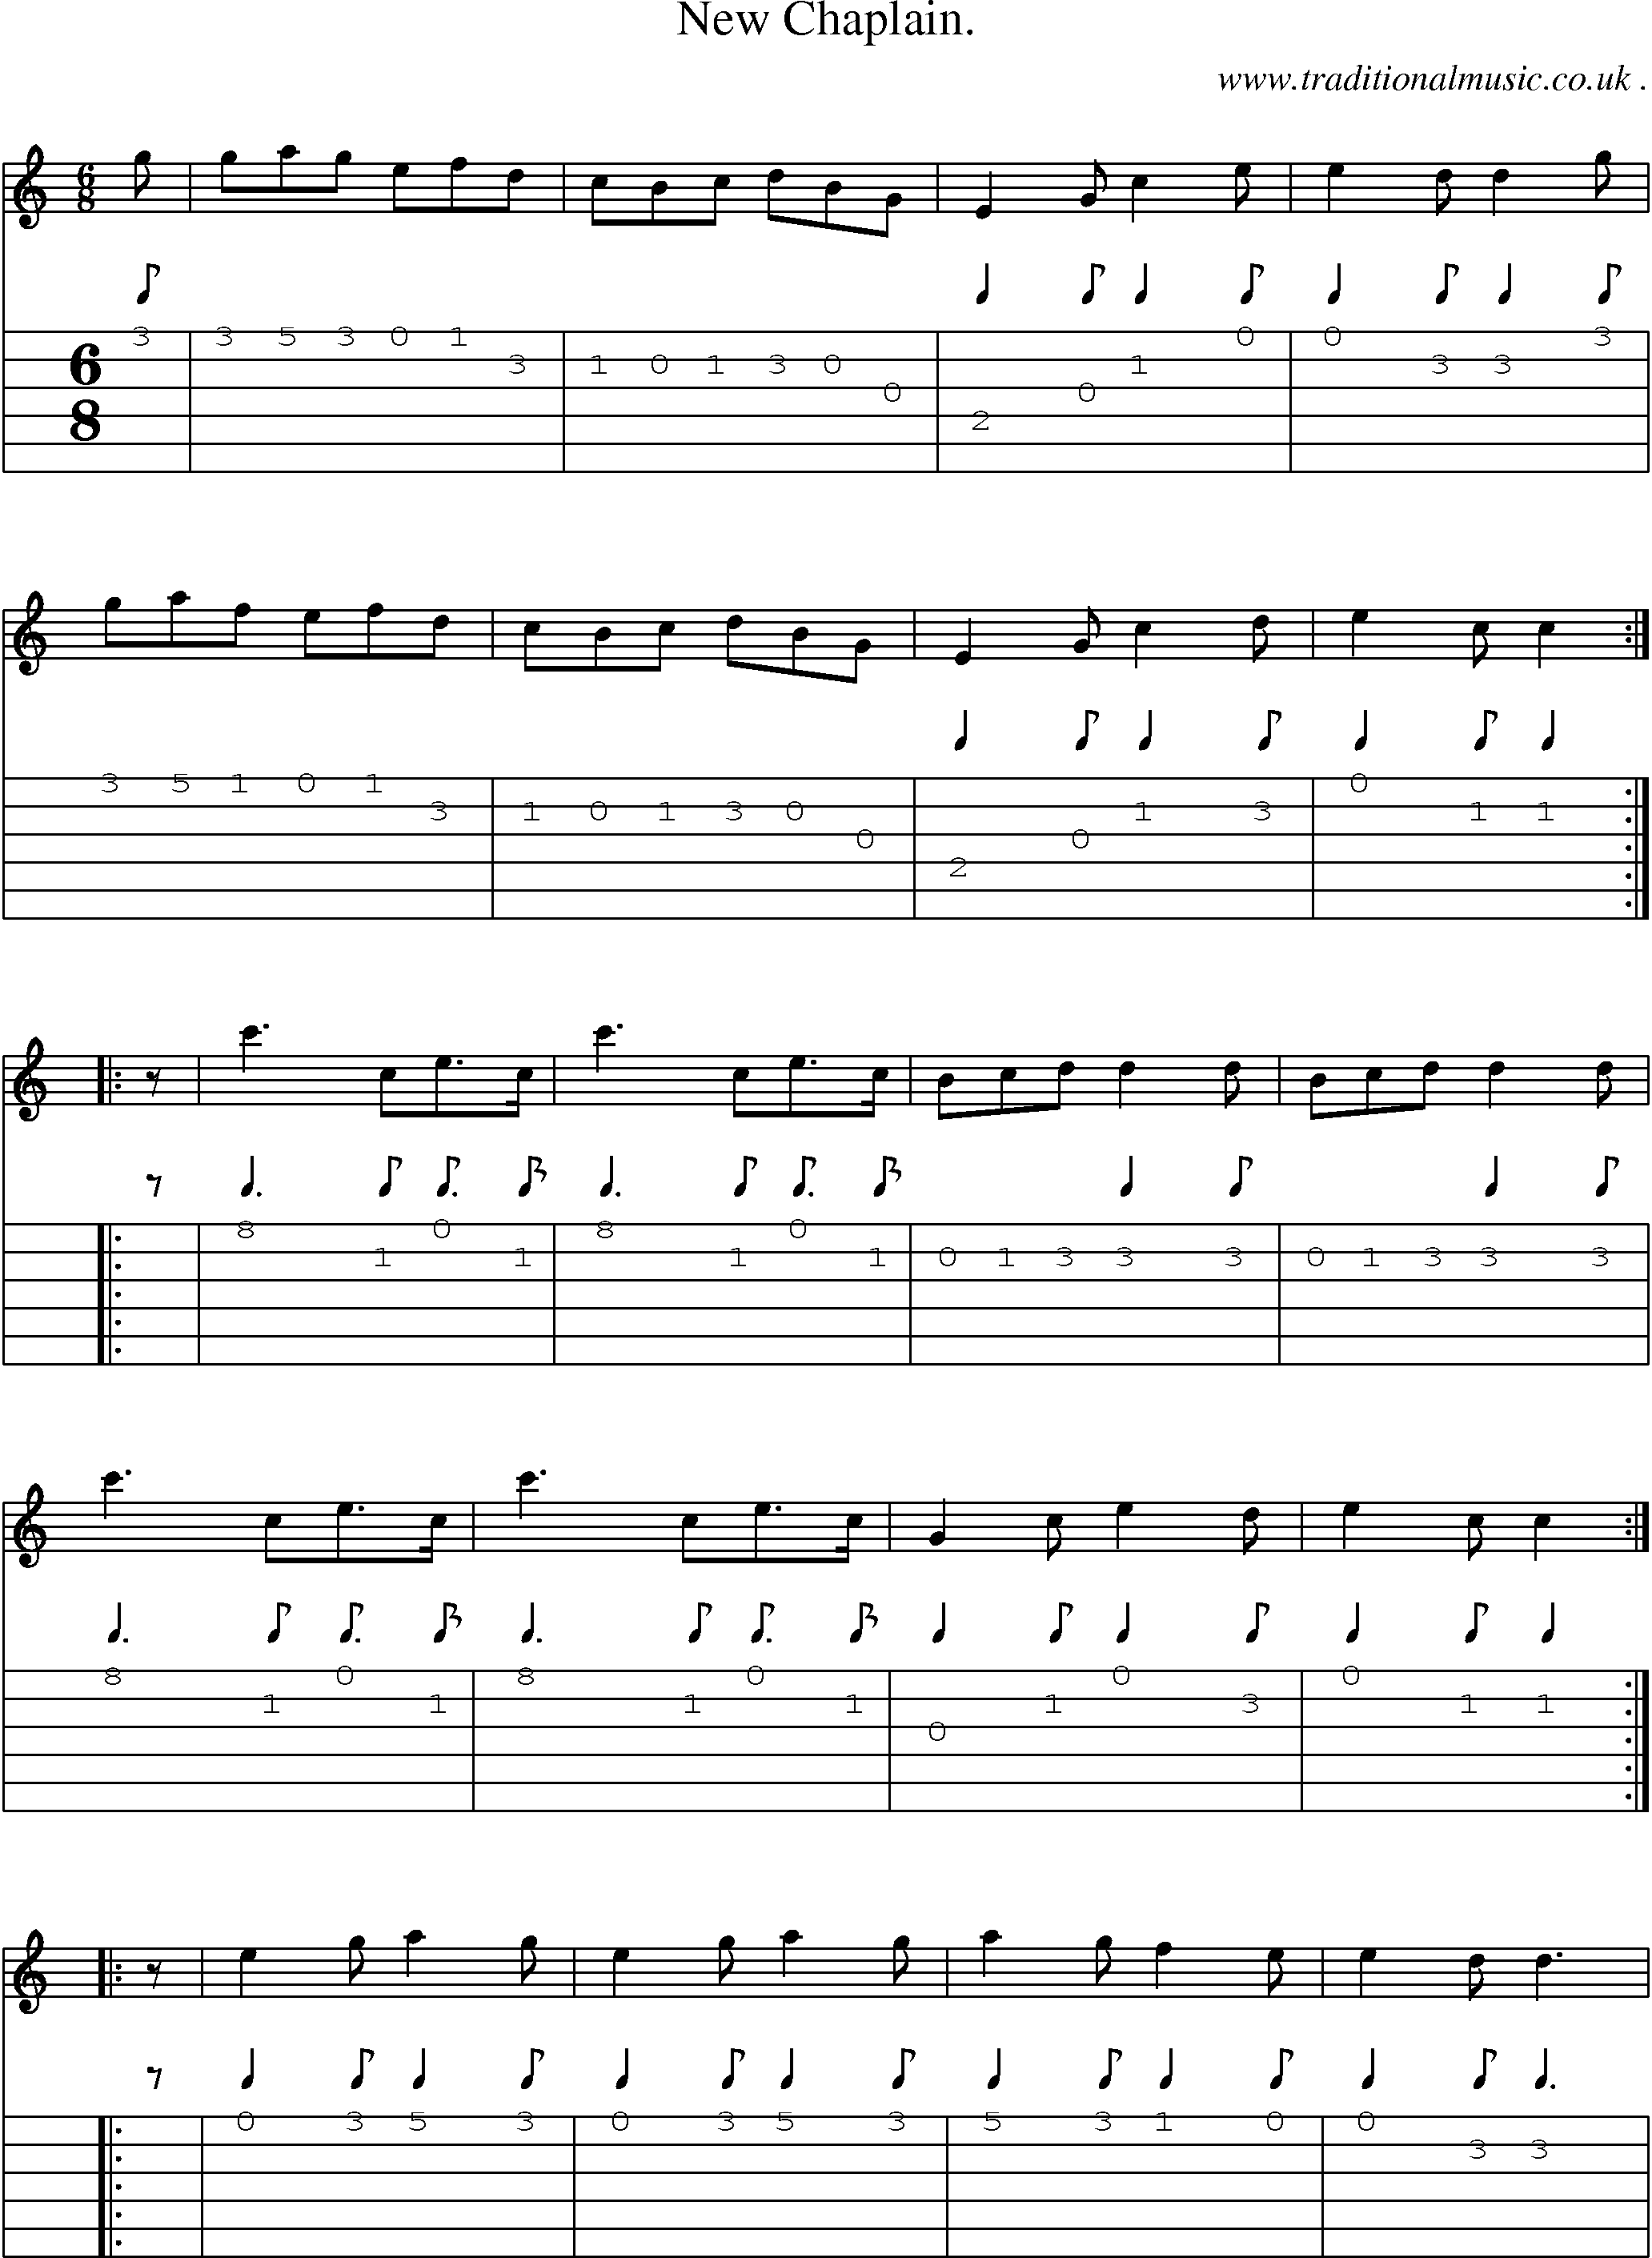 Sheet-Music and Guitar Tabs for New Chaplain